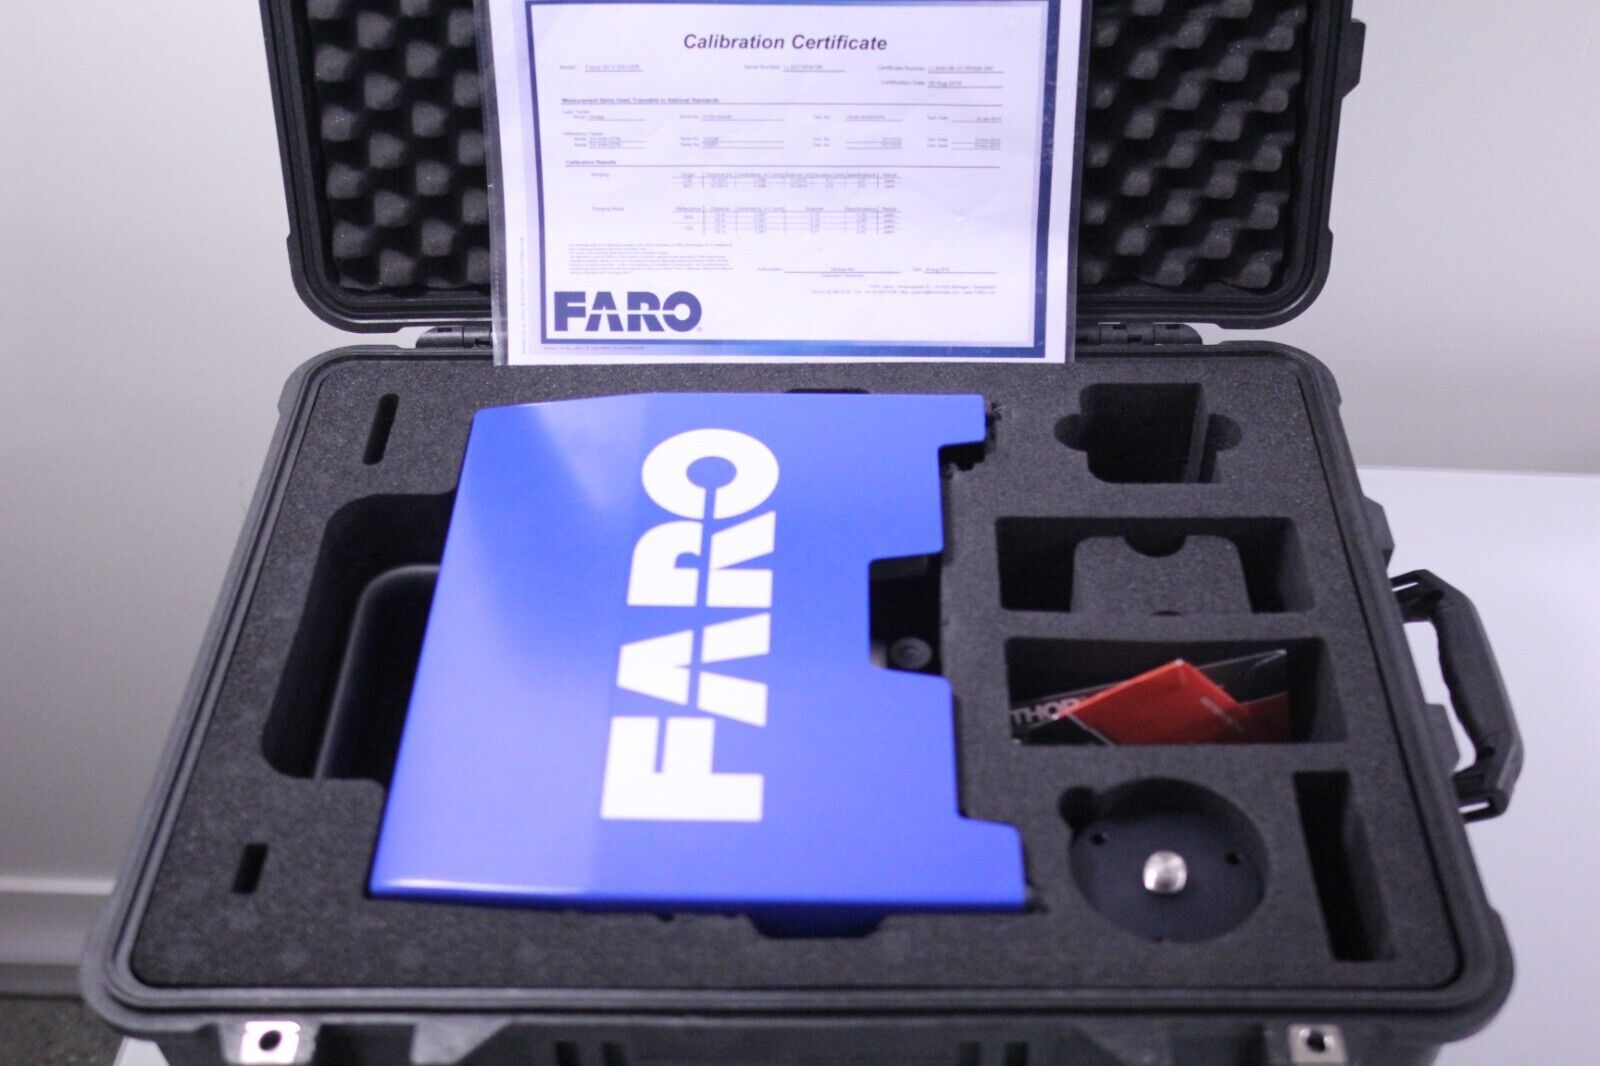 Faro Focus3D X330 HDR 3D Laser Scanner With accessories and case